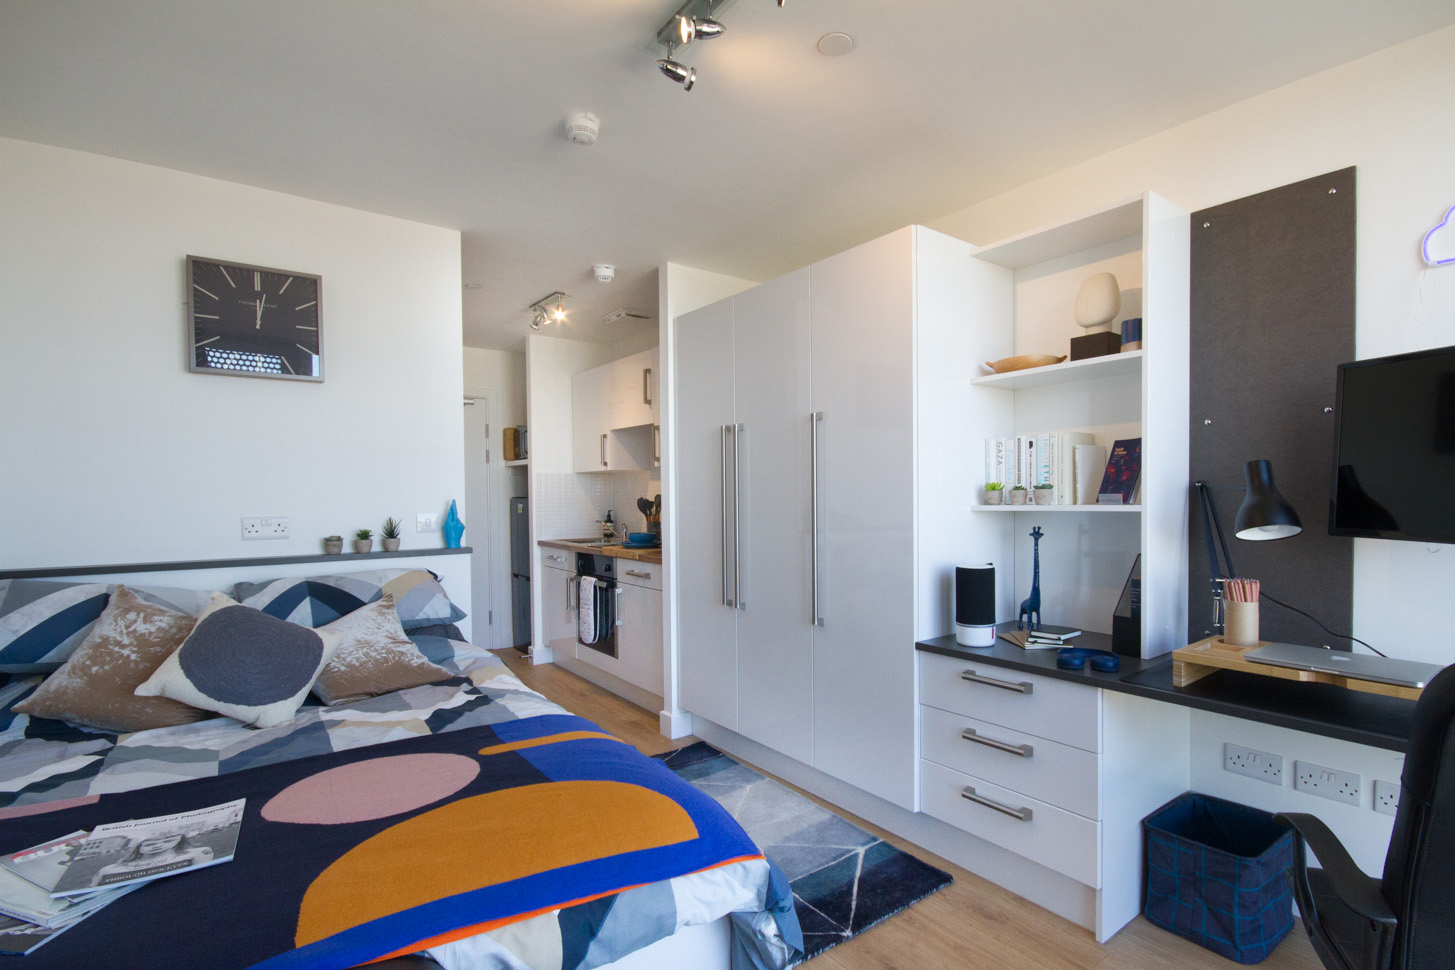 River Studio at CODE Student Accommodation Leicester